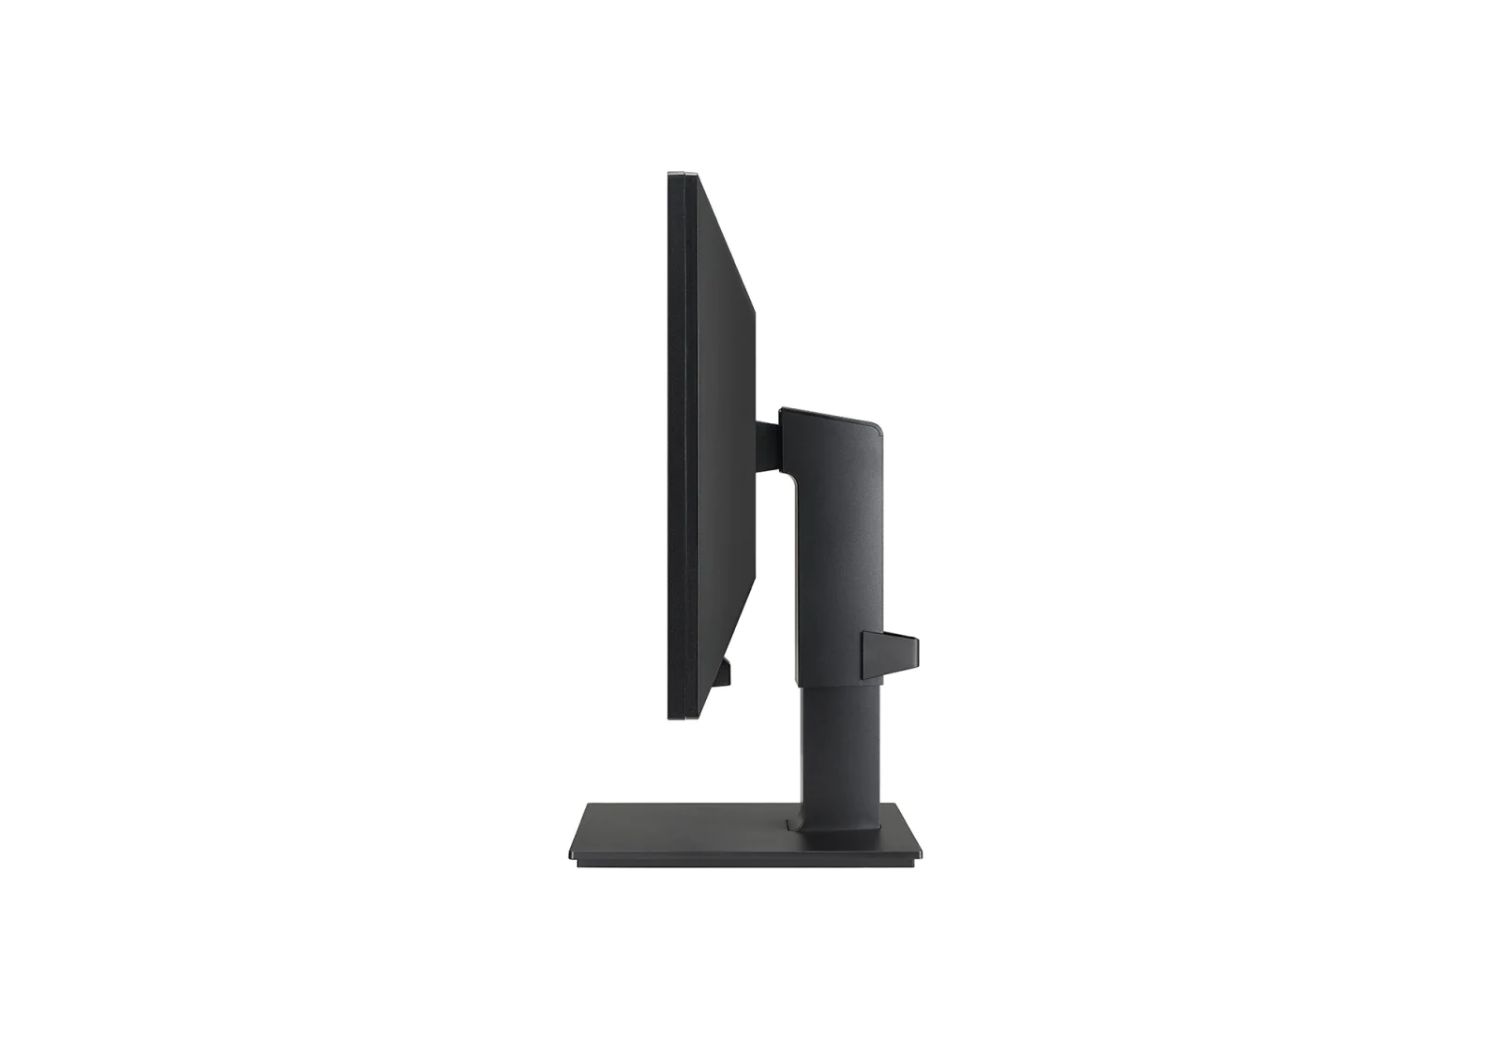 OUT8764 - Monitor LG 22